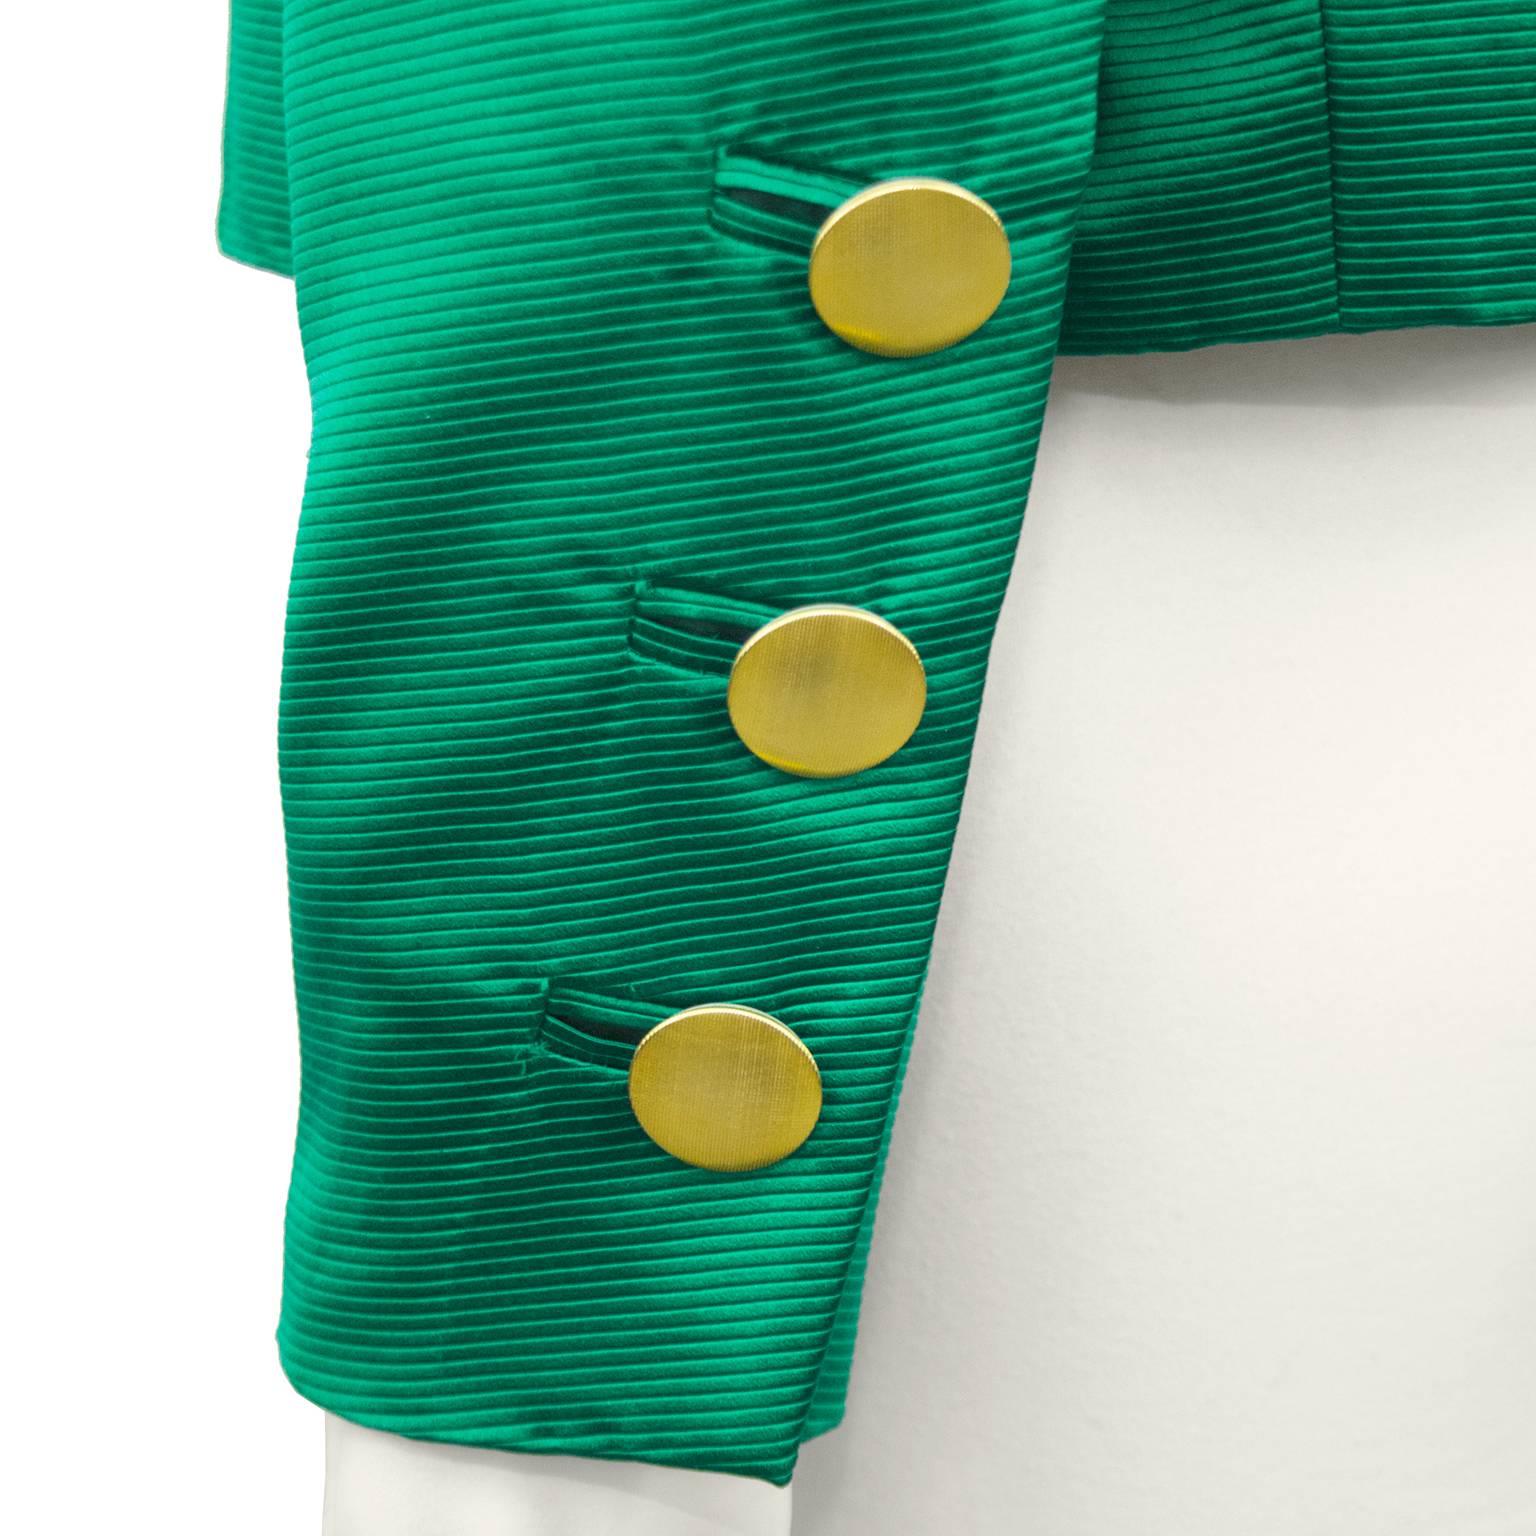 Yves Saint Laurent YSL Emerald Green Jacket, 1980s   In Excellent Condition For Sale In Toronto, Ontario